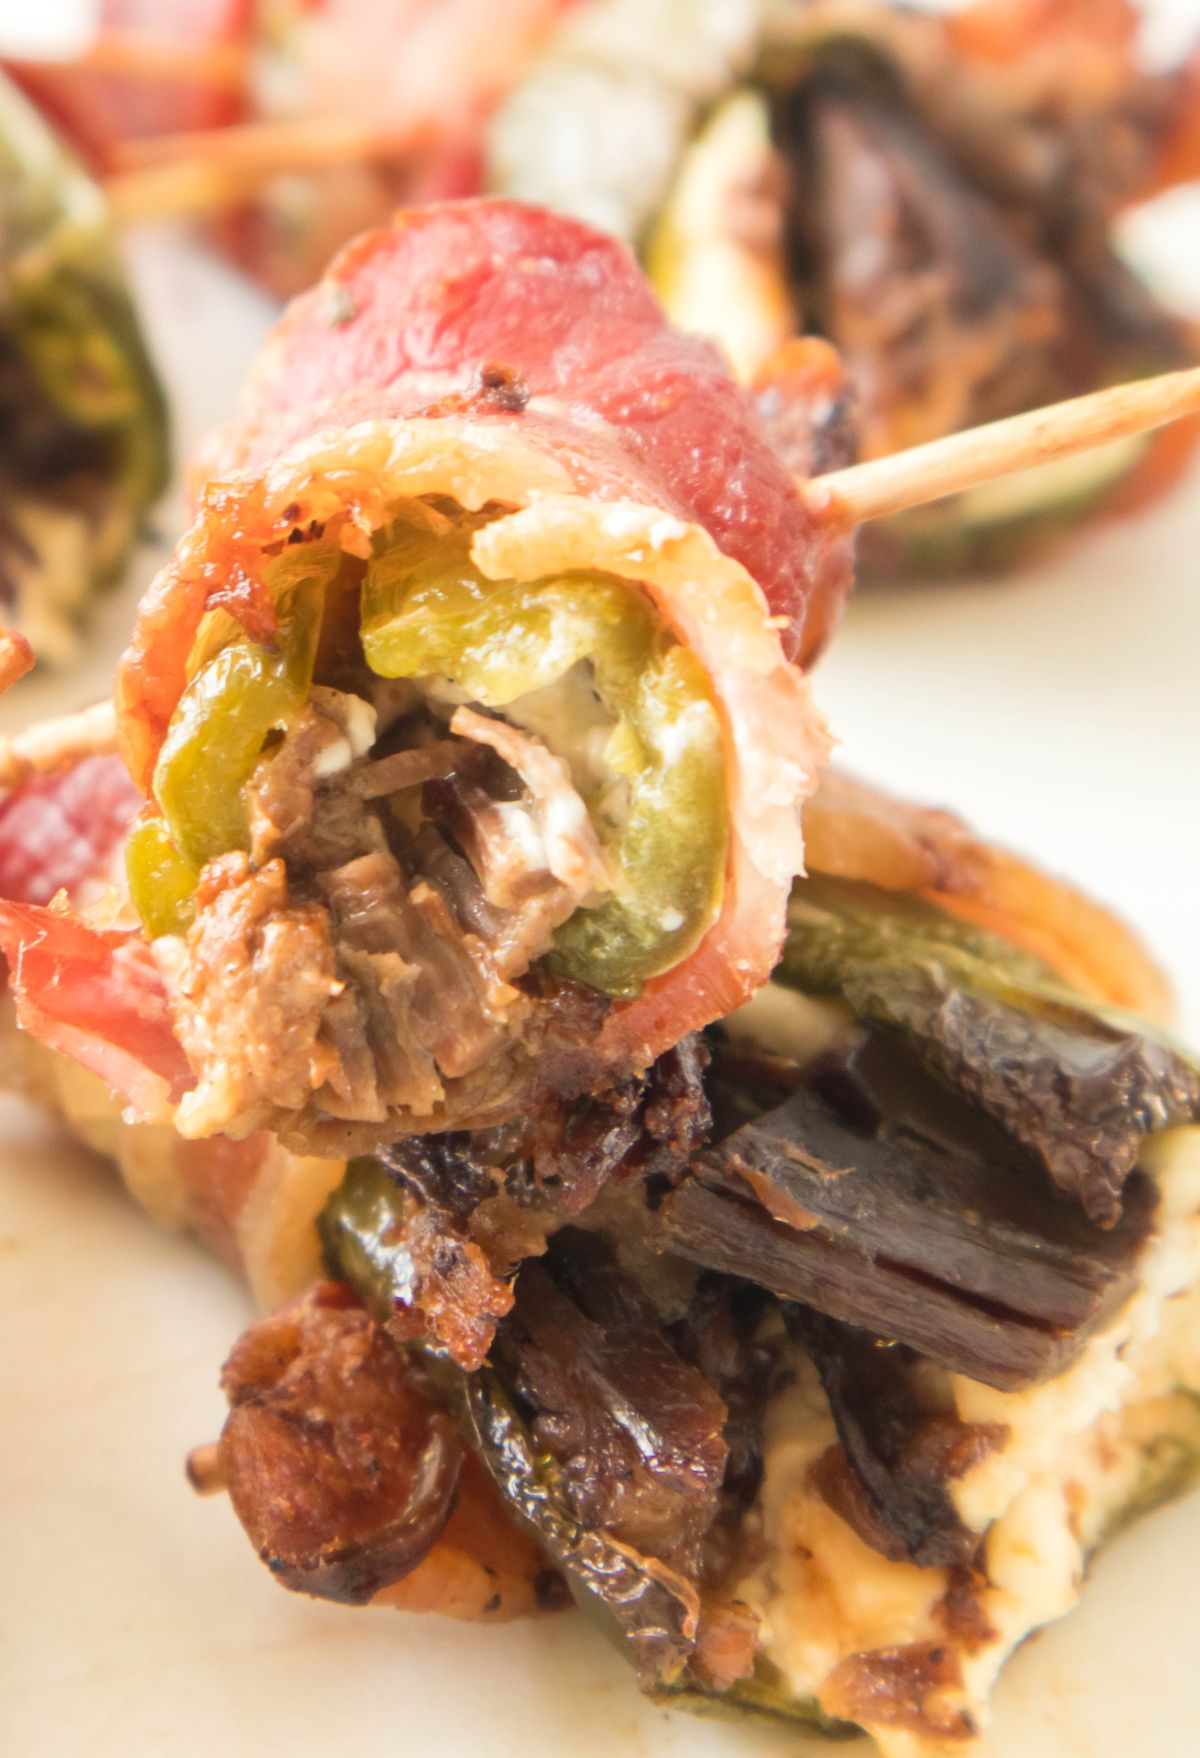 Stuffed peppers with bacon and cheese on skewers.